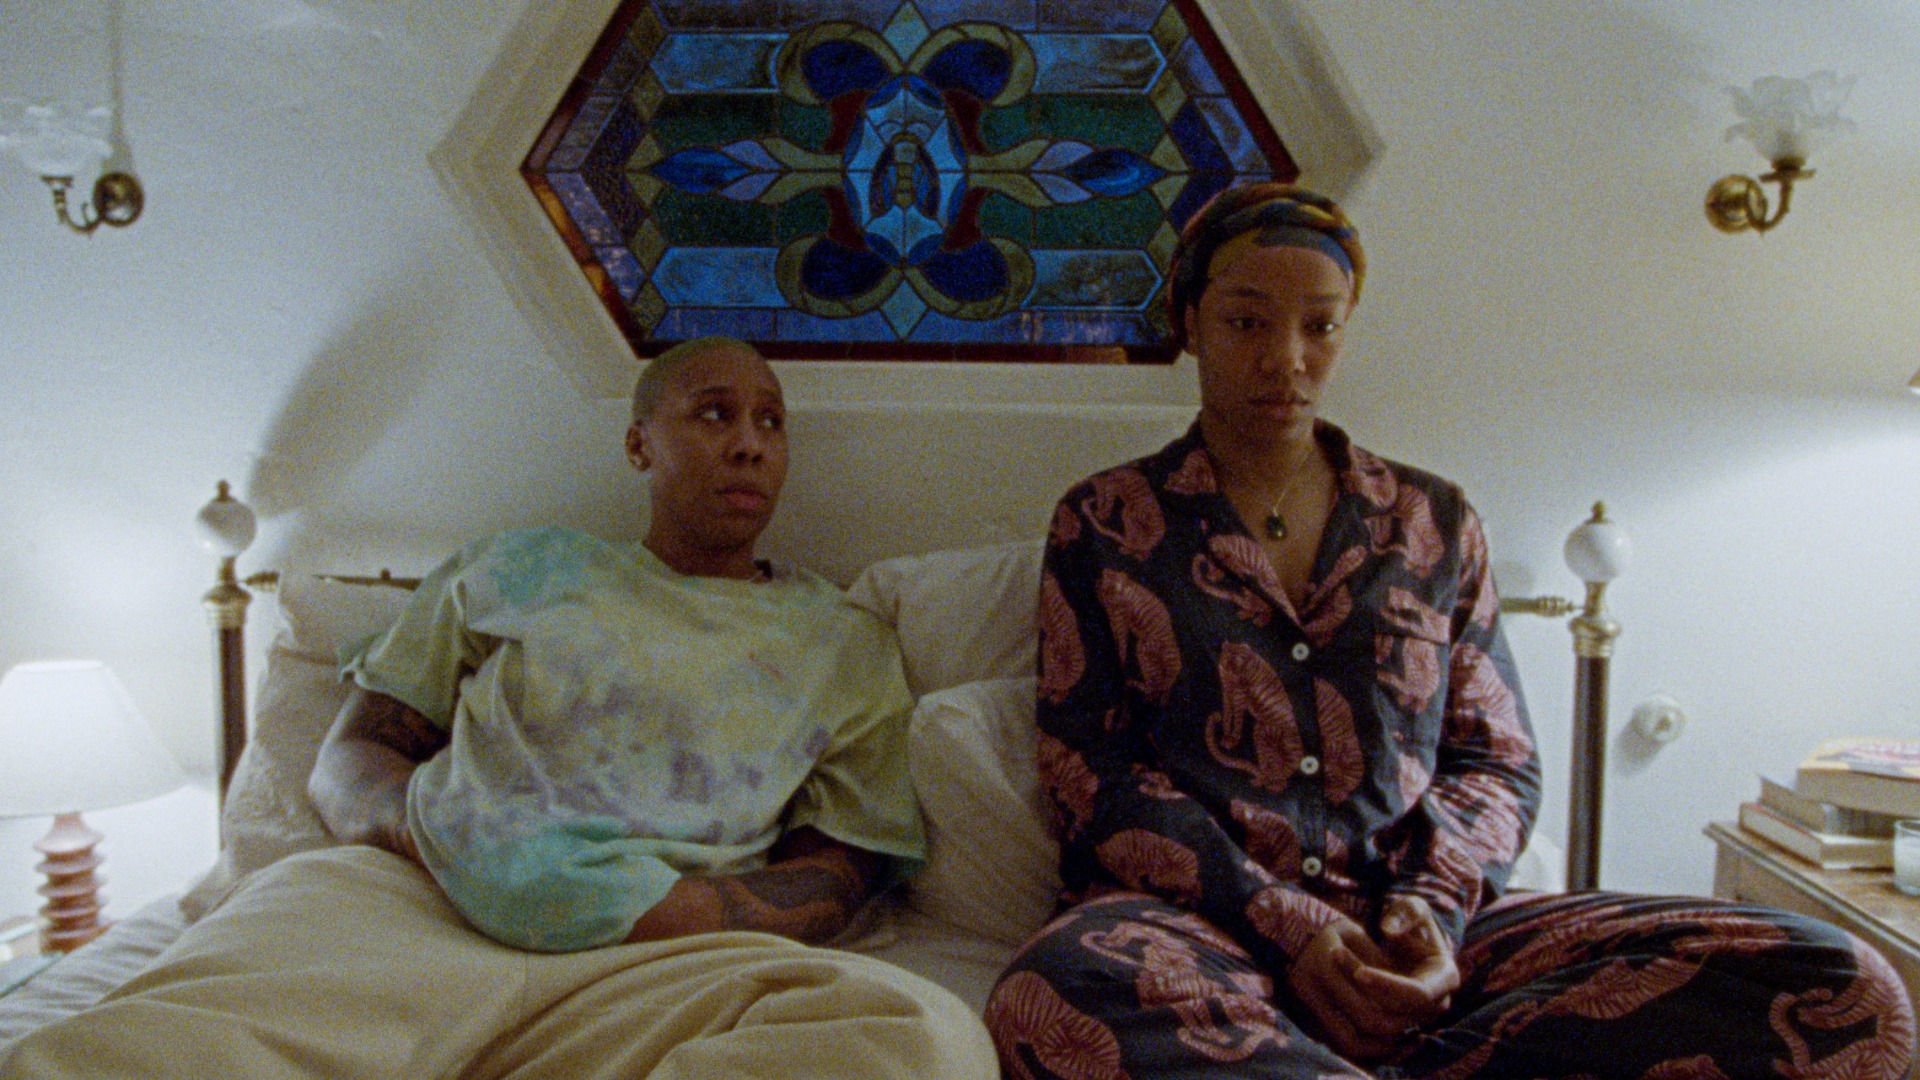 Lena Waithe and Naomi Ackie in Master of None